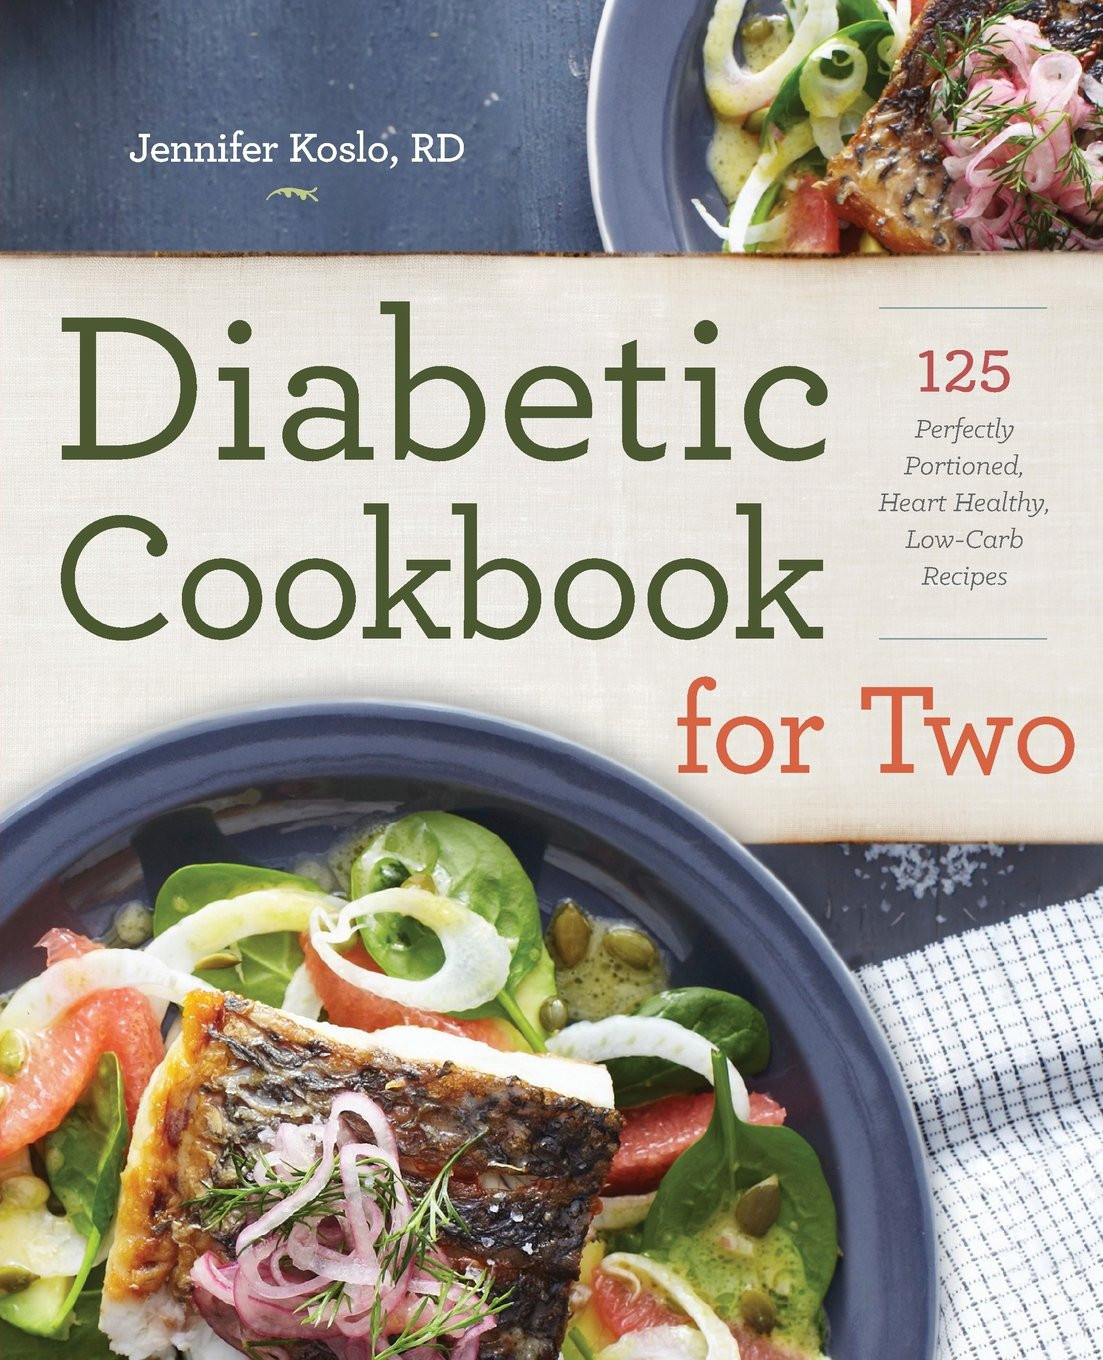 Diabetic Recipes Books
 Diabetic Cookbook for Two 125 Perfectly Portioned Heart